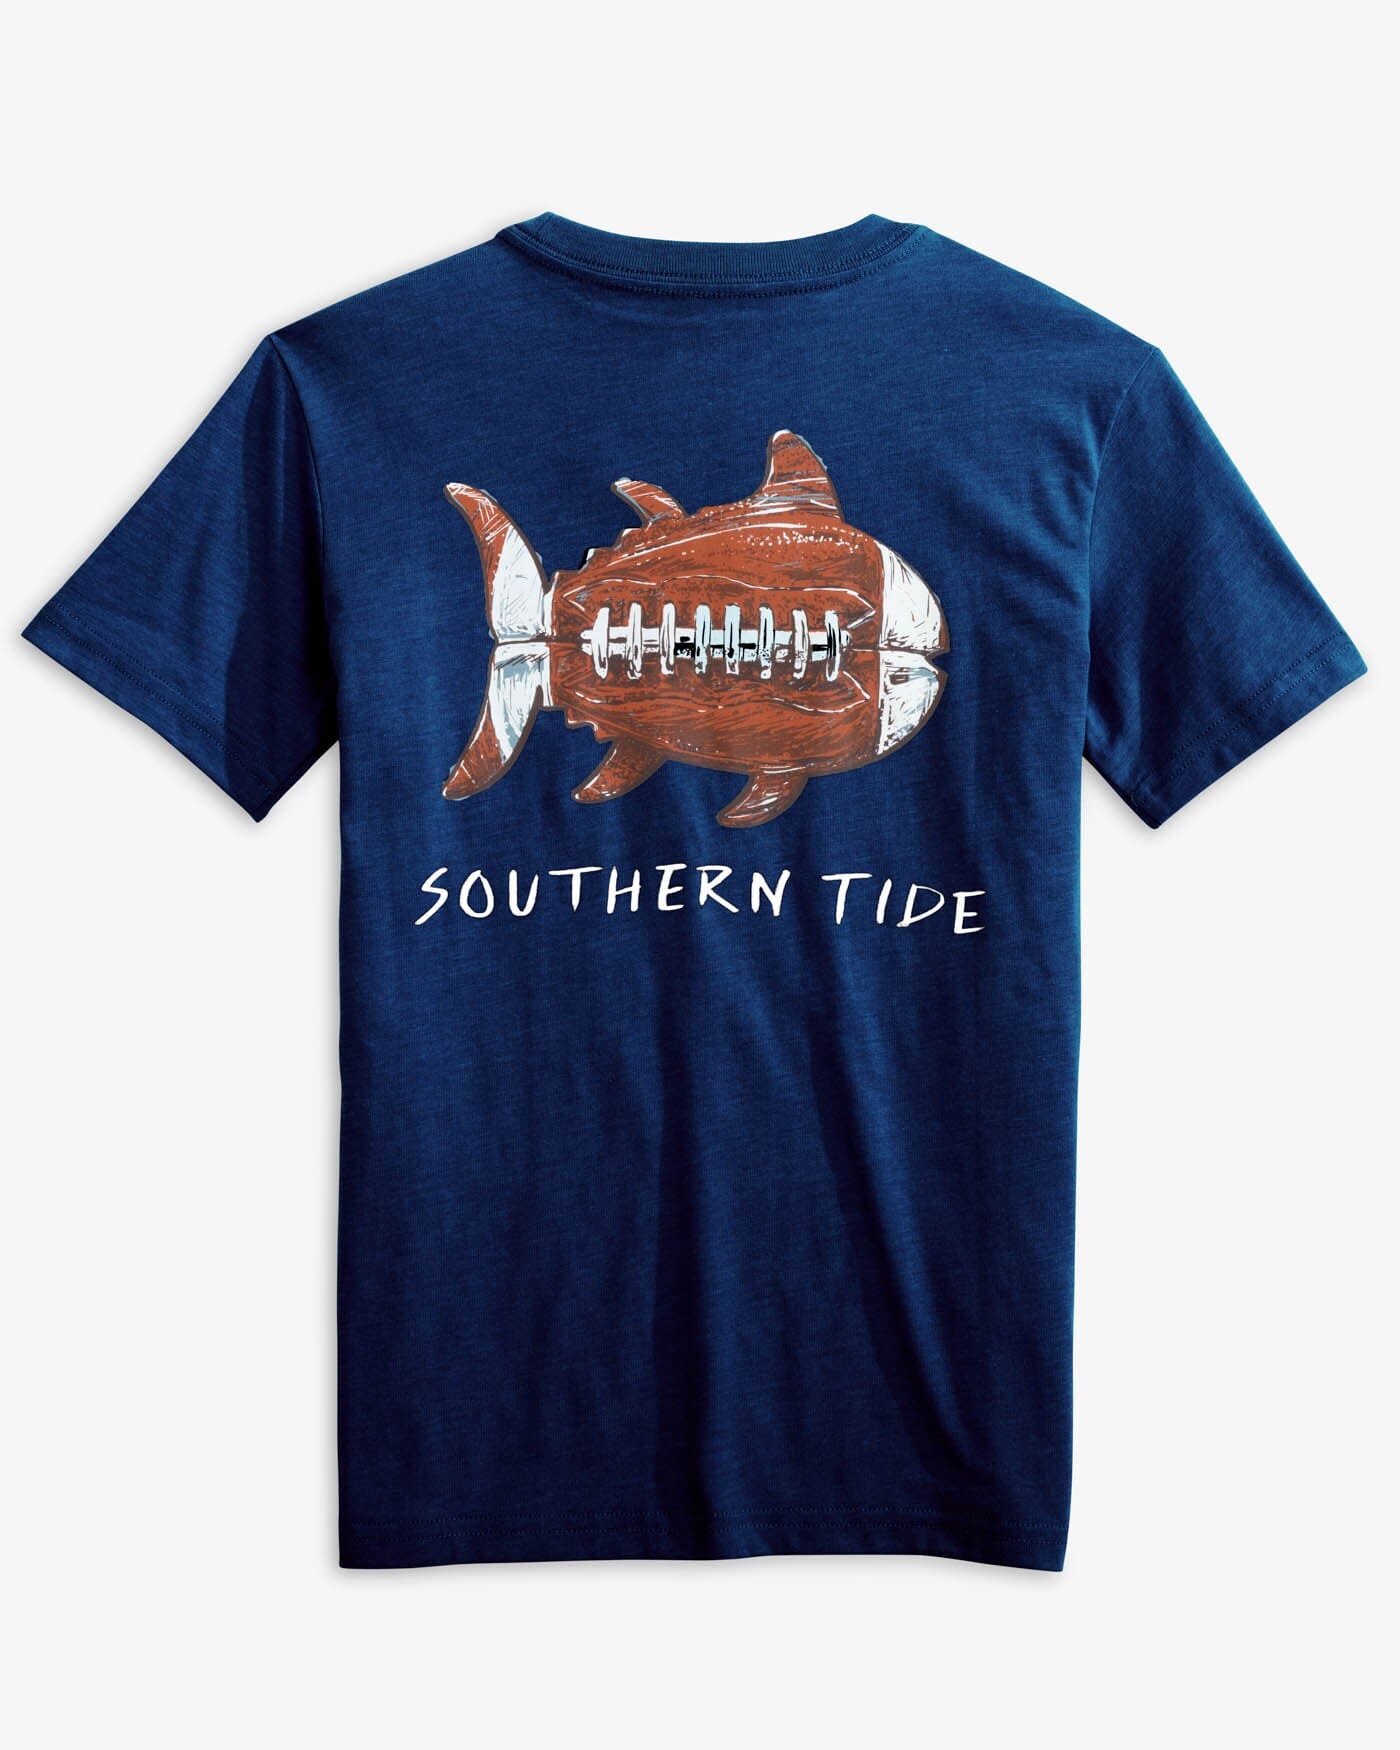 Southern Tide Kids' Sketched Football Heather T-Shirt Blue (Size S) 60% Cotton 40% Polyester